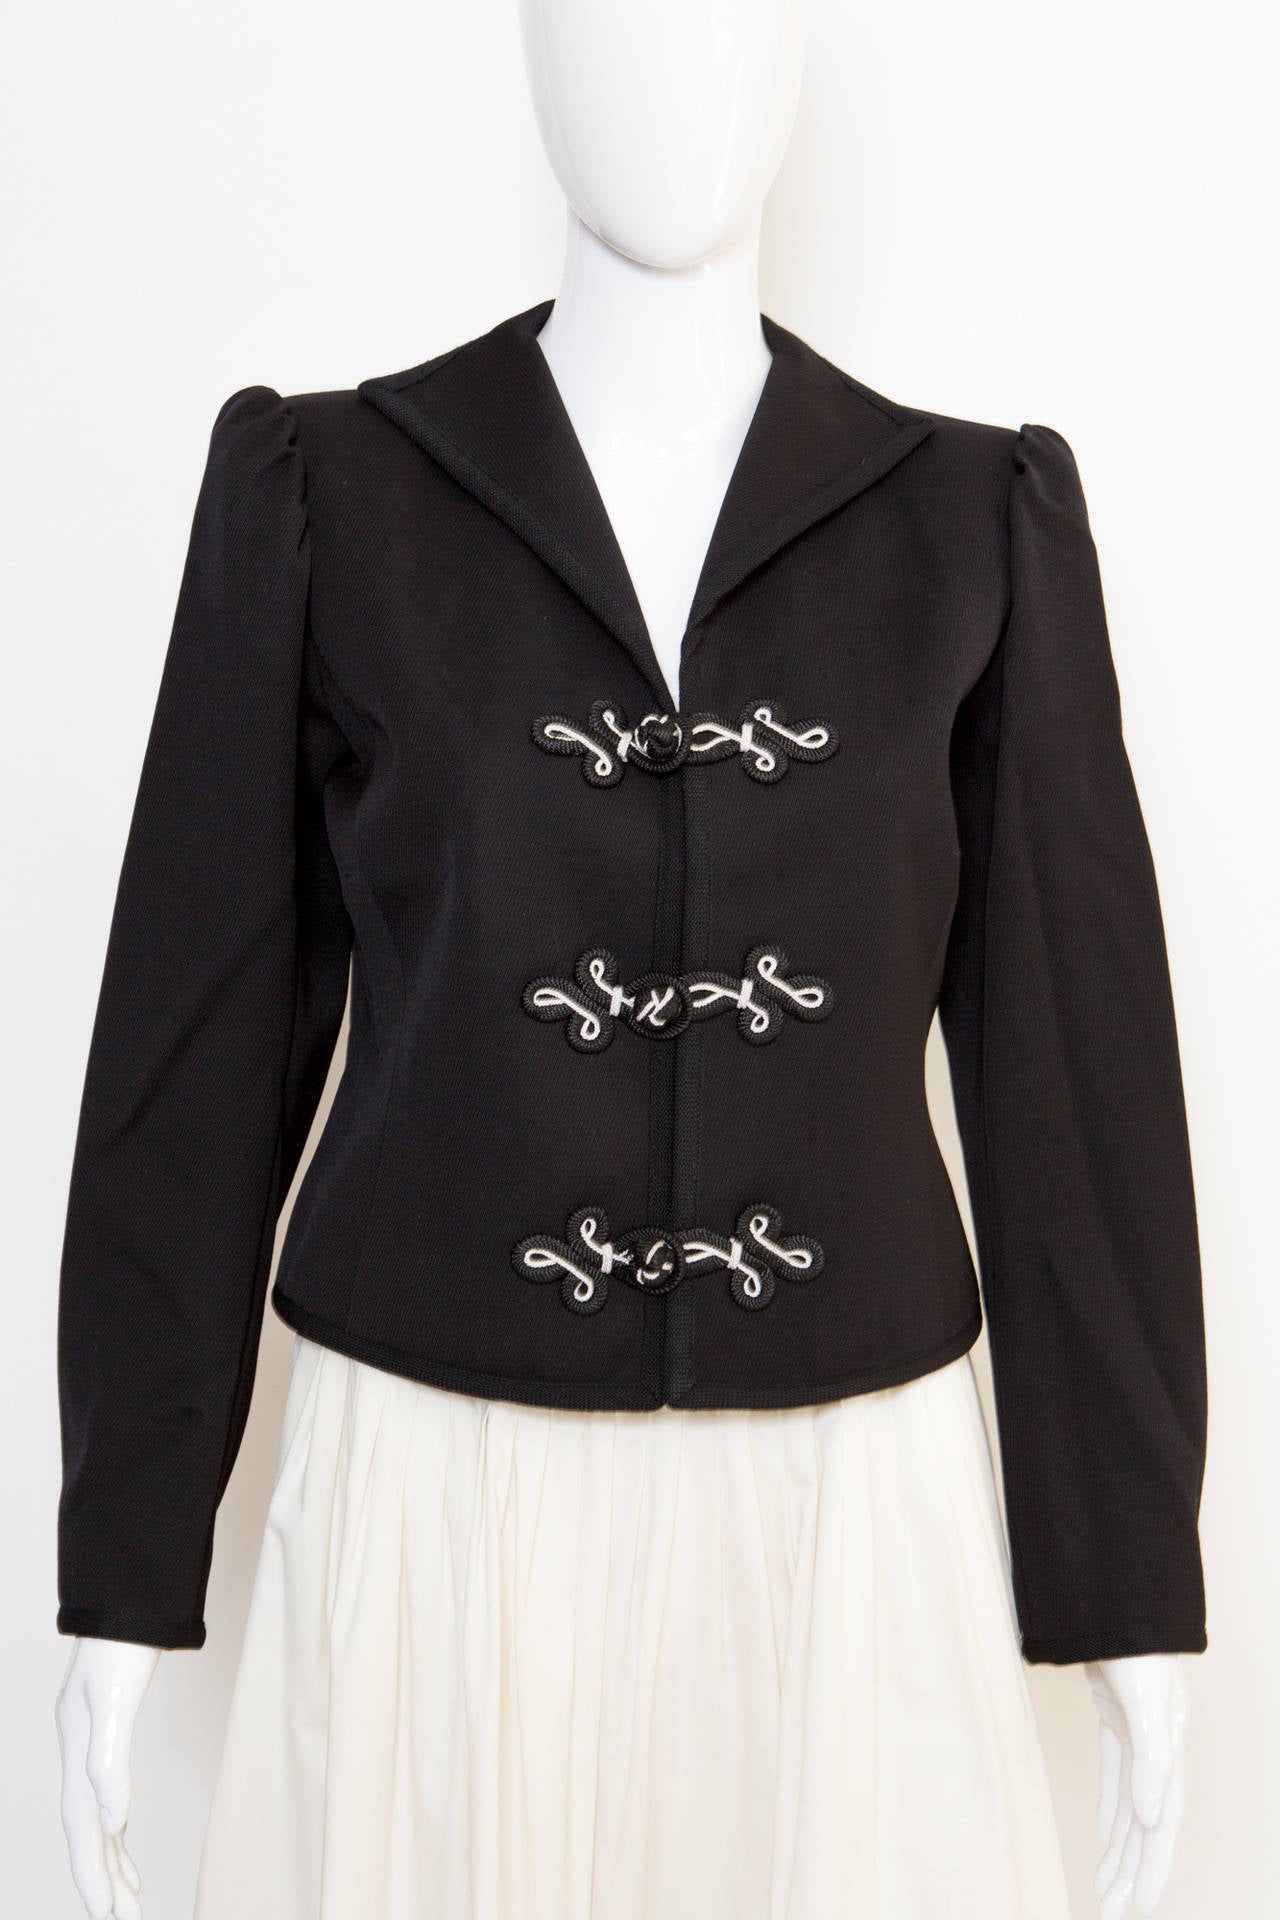 Black wool jacket from Yves Saint Laurent Vintage featuring a v-neck, shoulder pads, an embroidered toggle fastening and long sleeves.
Estimated size 38 fr